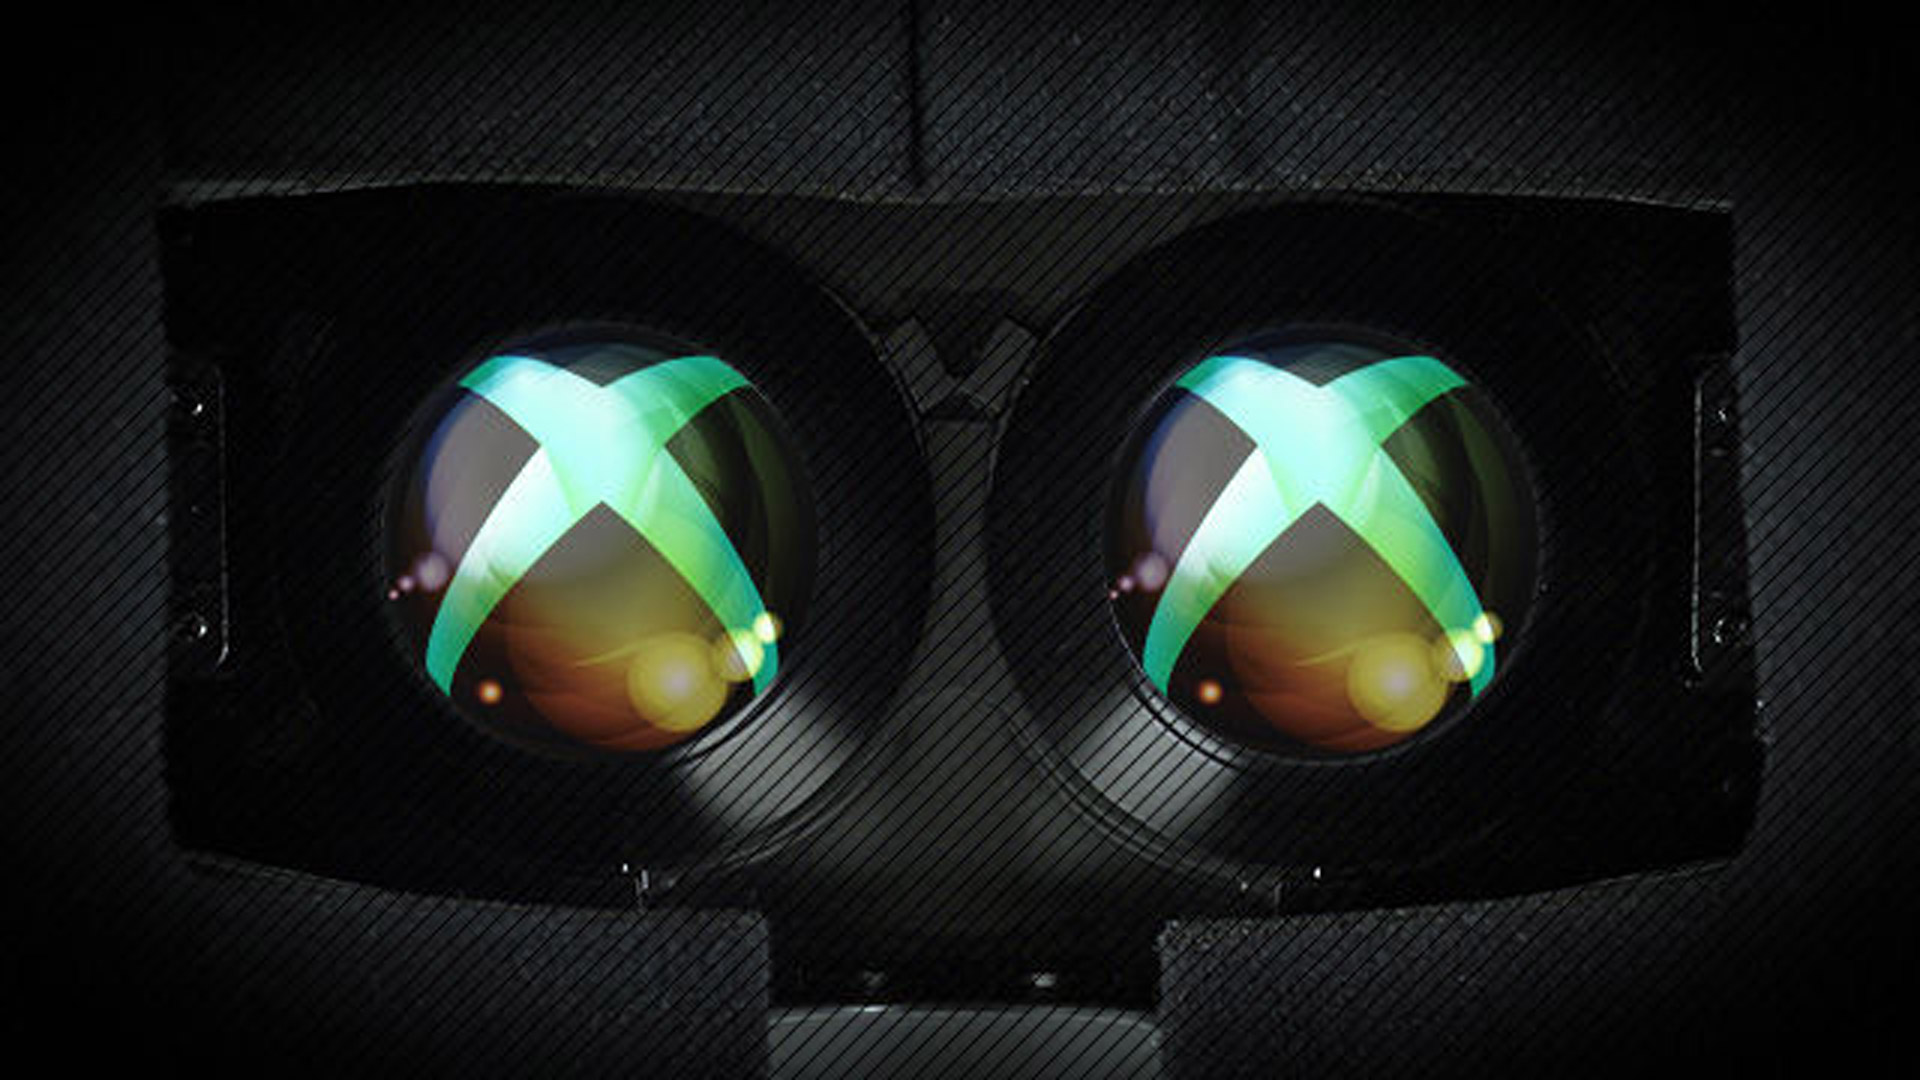 vr compatible with xbox one